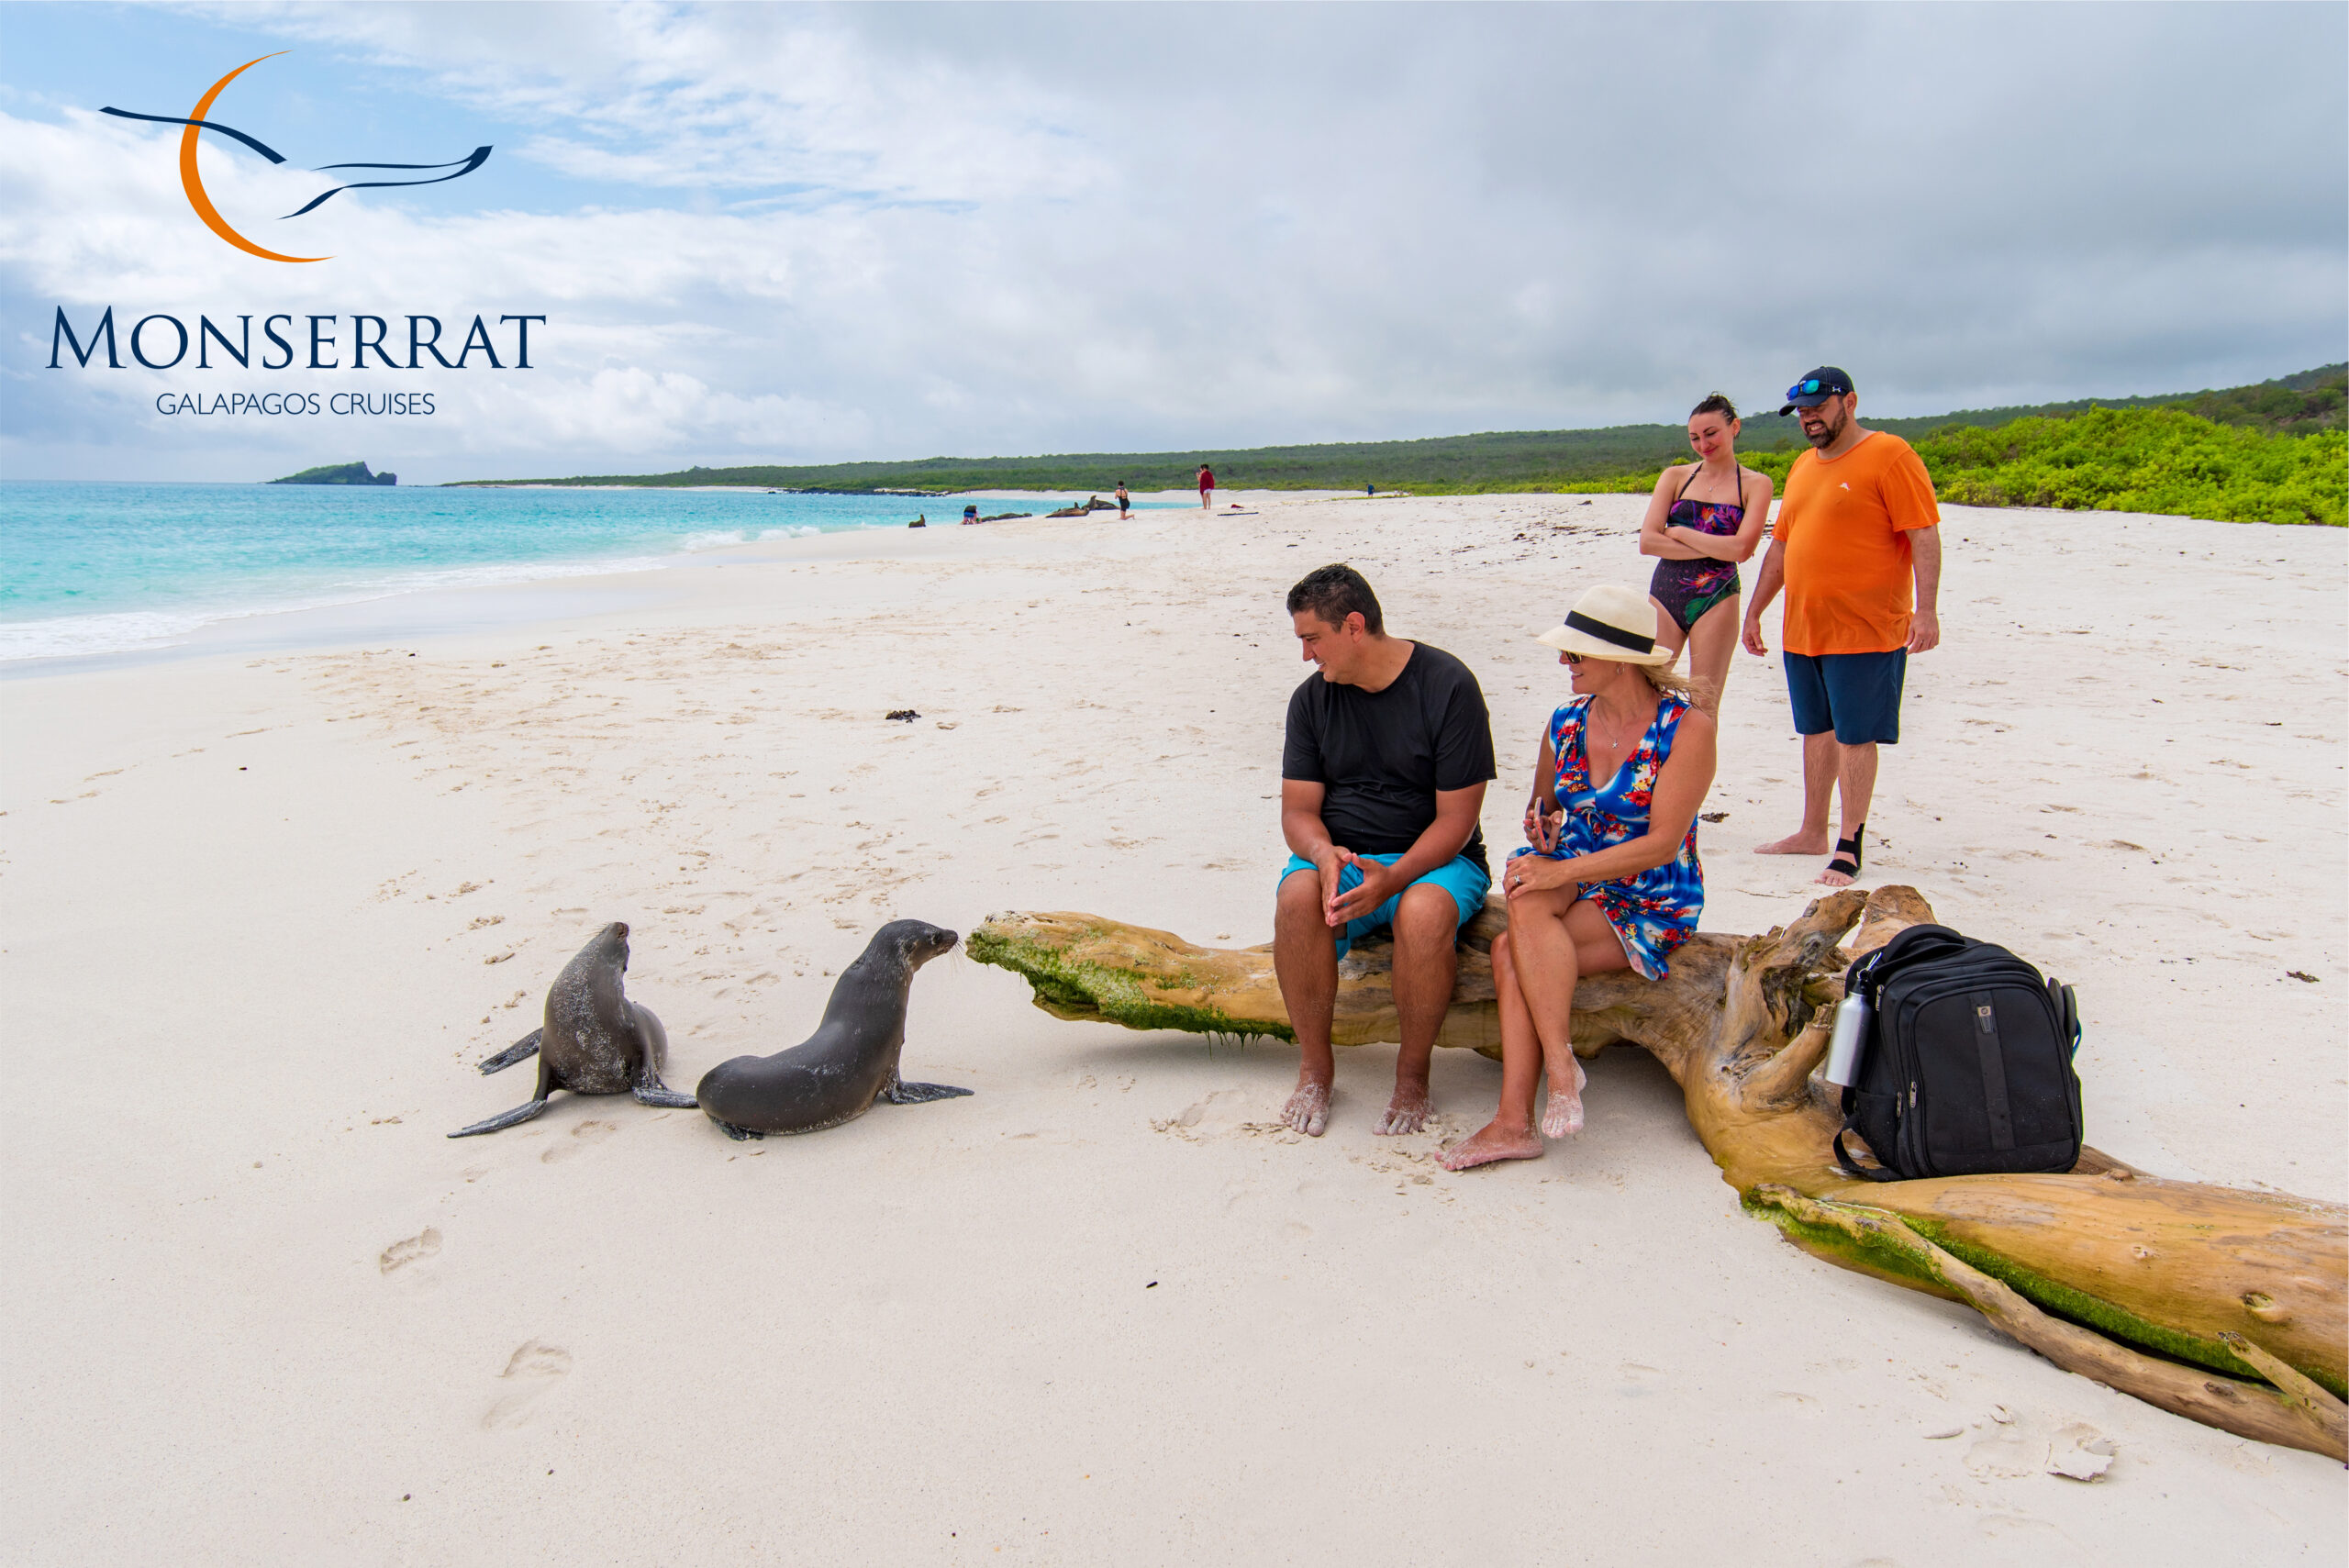 Galatrails - Mapping your adventure Monserrat-Galapagos-Cruises-Guest-Experience-12-High-Res-scaled Monserrat  